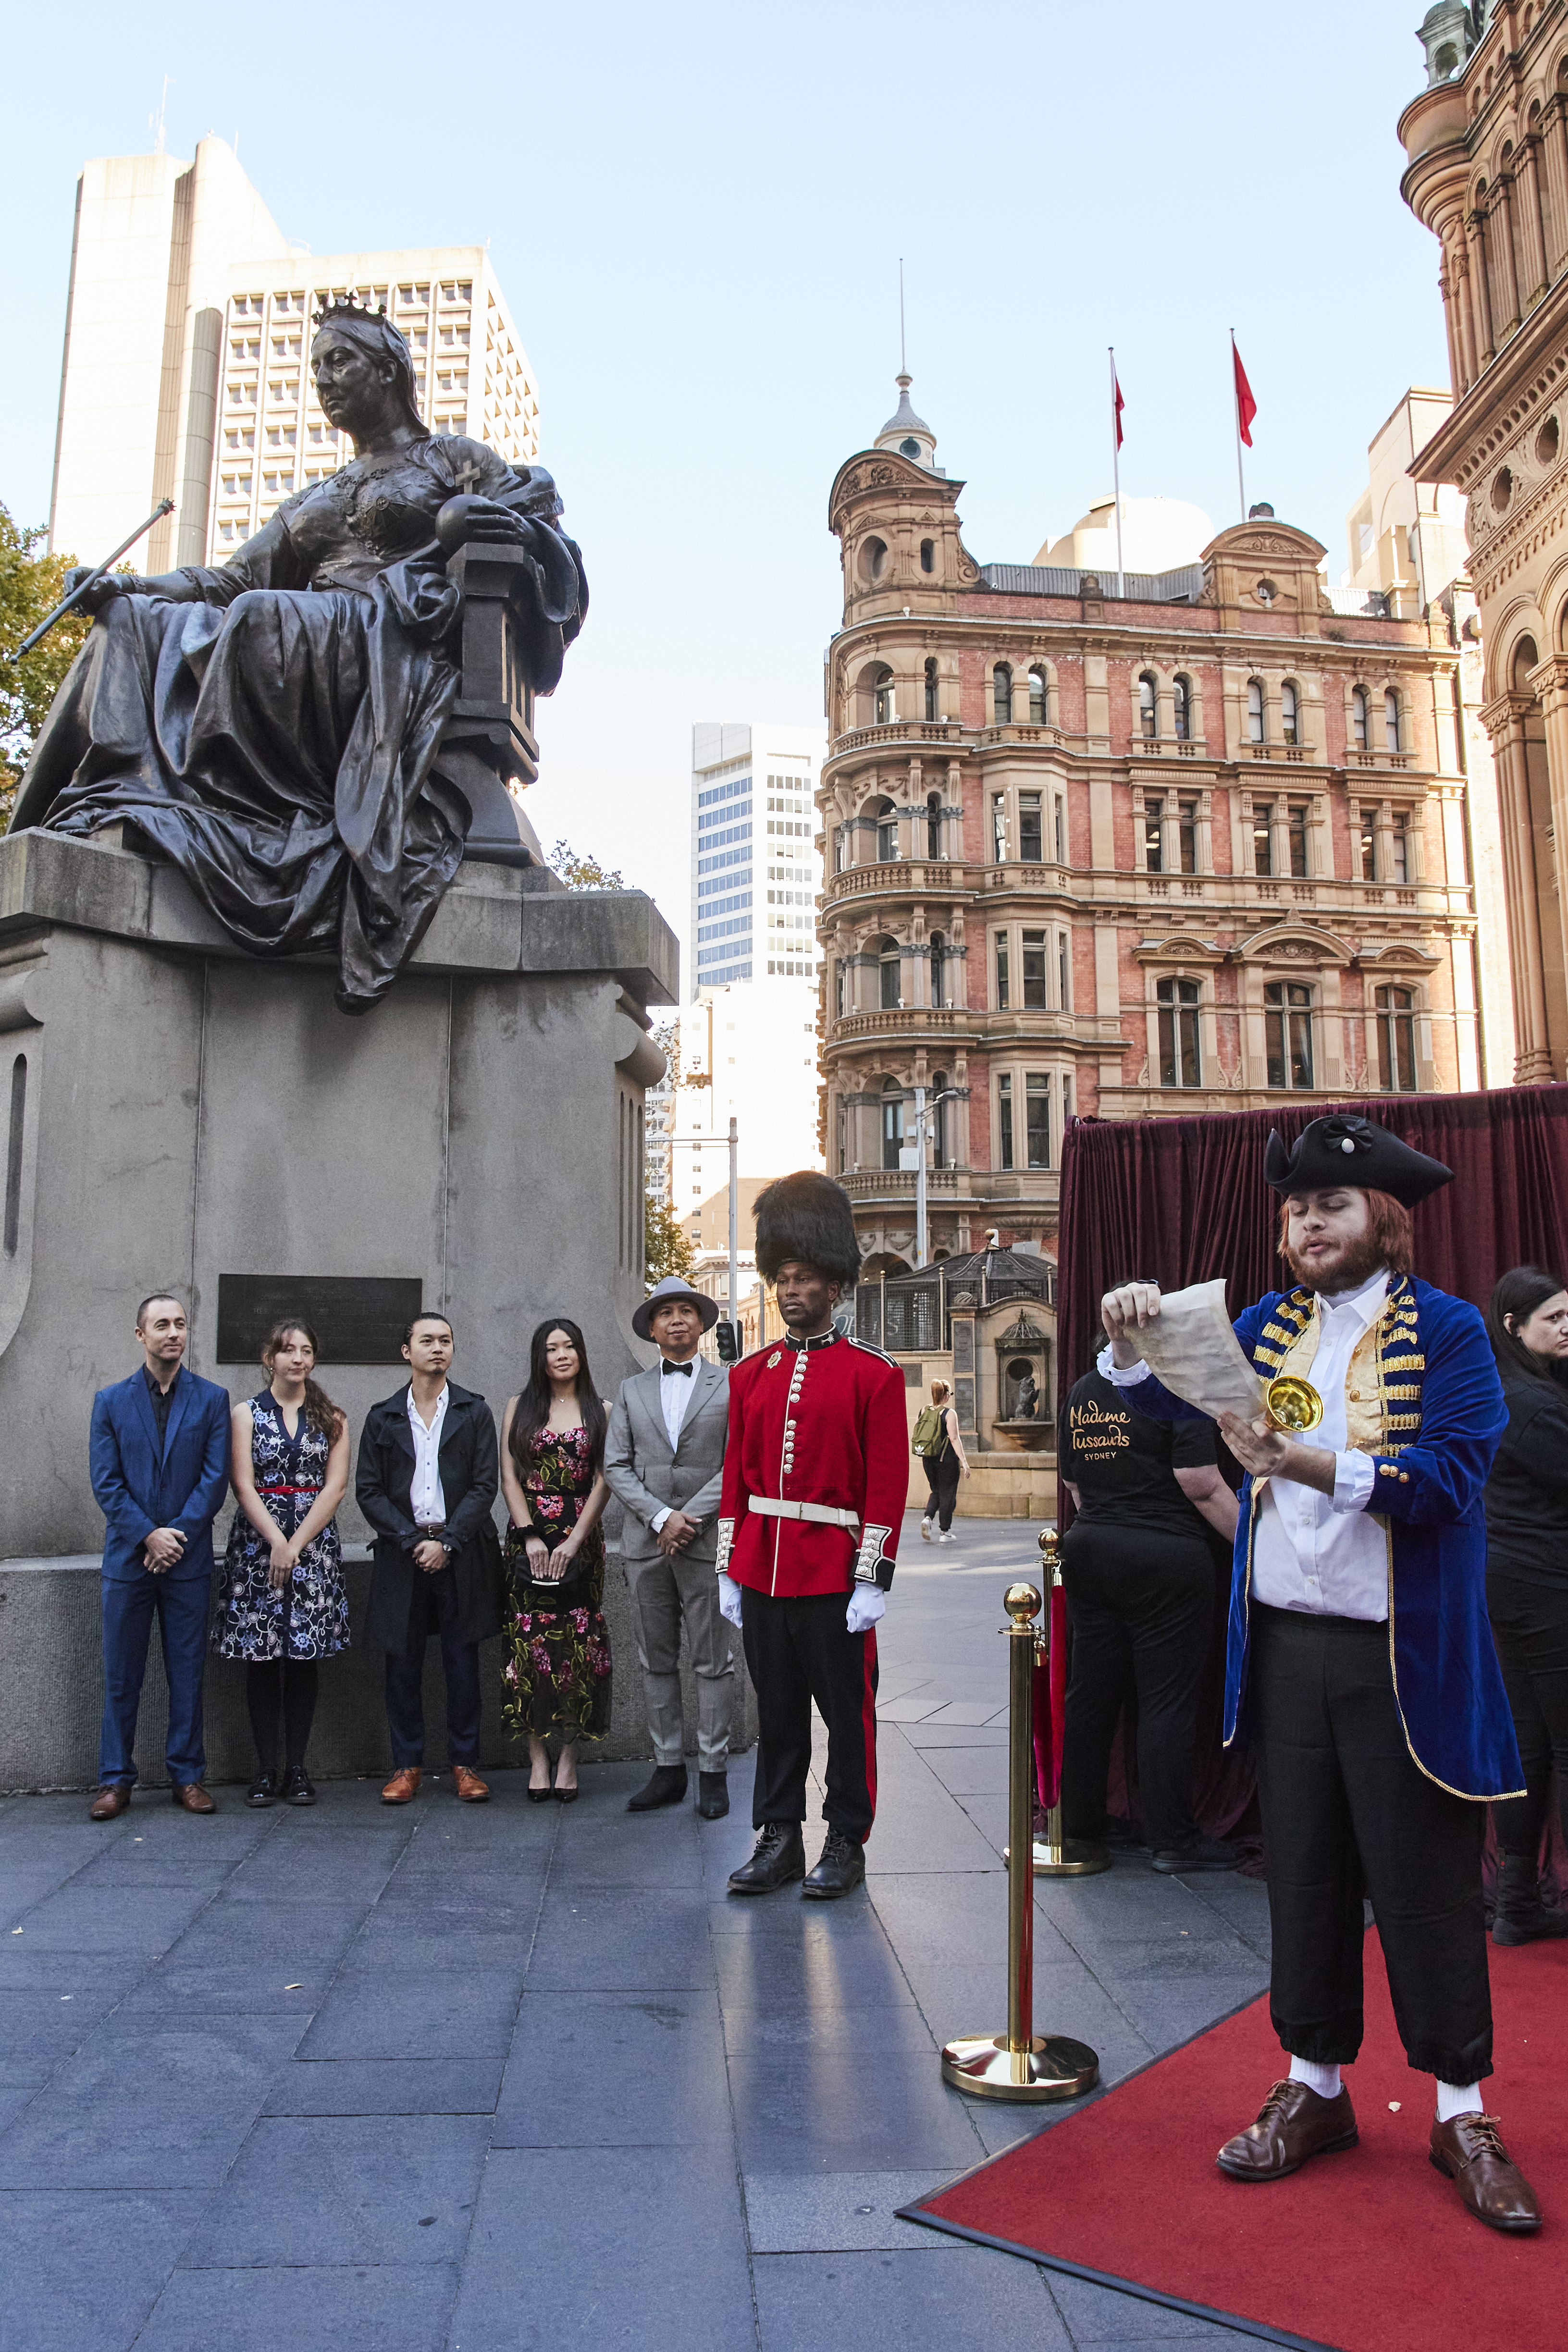 Town Crier Alexander Smith Announce King Charles III To Take The Throne 3 Madame Tussauds Sydney